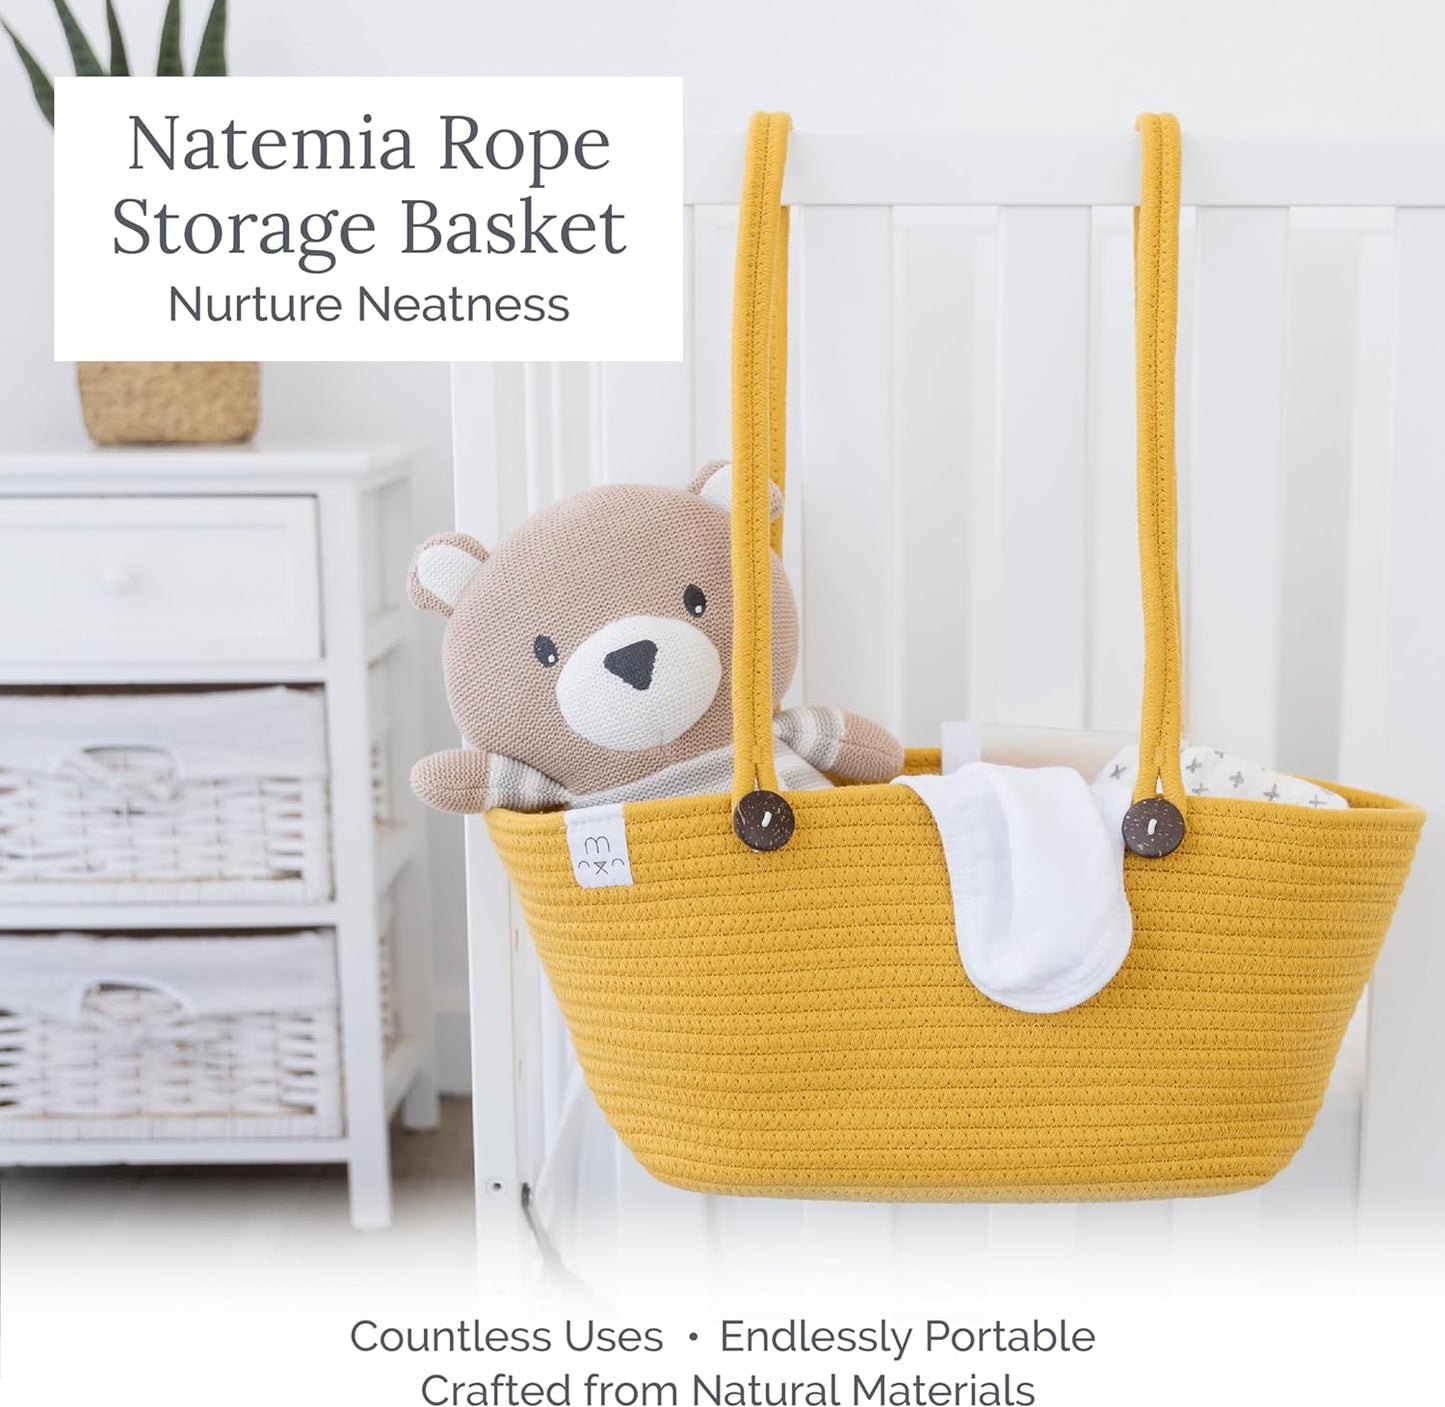 Natemia Rope Storage Basket- Nursery Bin and Toy Organizer (15”x15”x14”), Laundry Basket, Basket for Towels, Pillows and Blankets, Perfect Baby Registry Gift